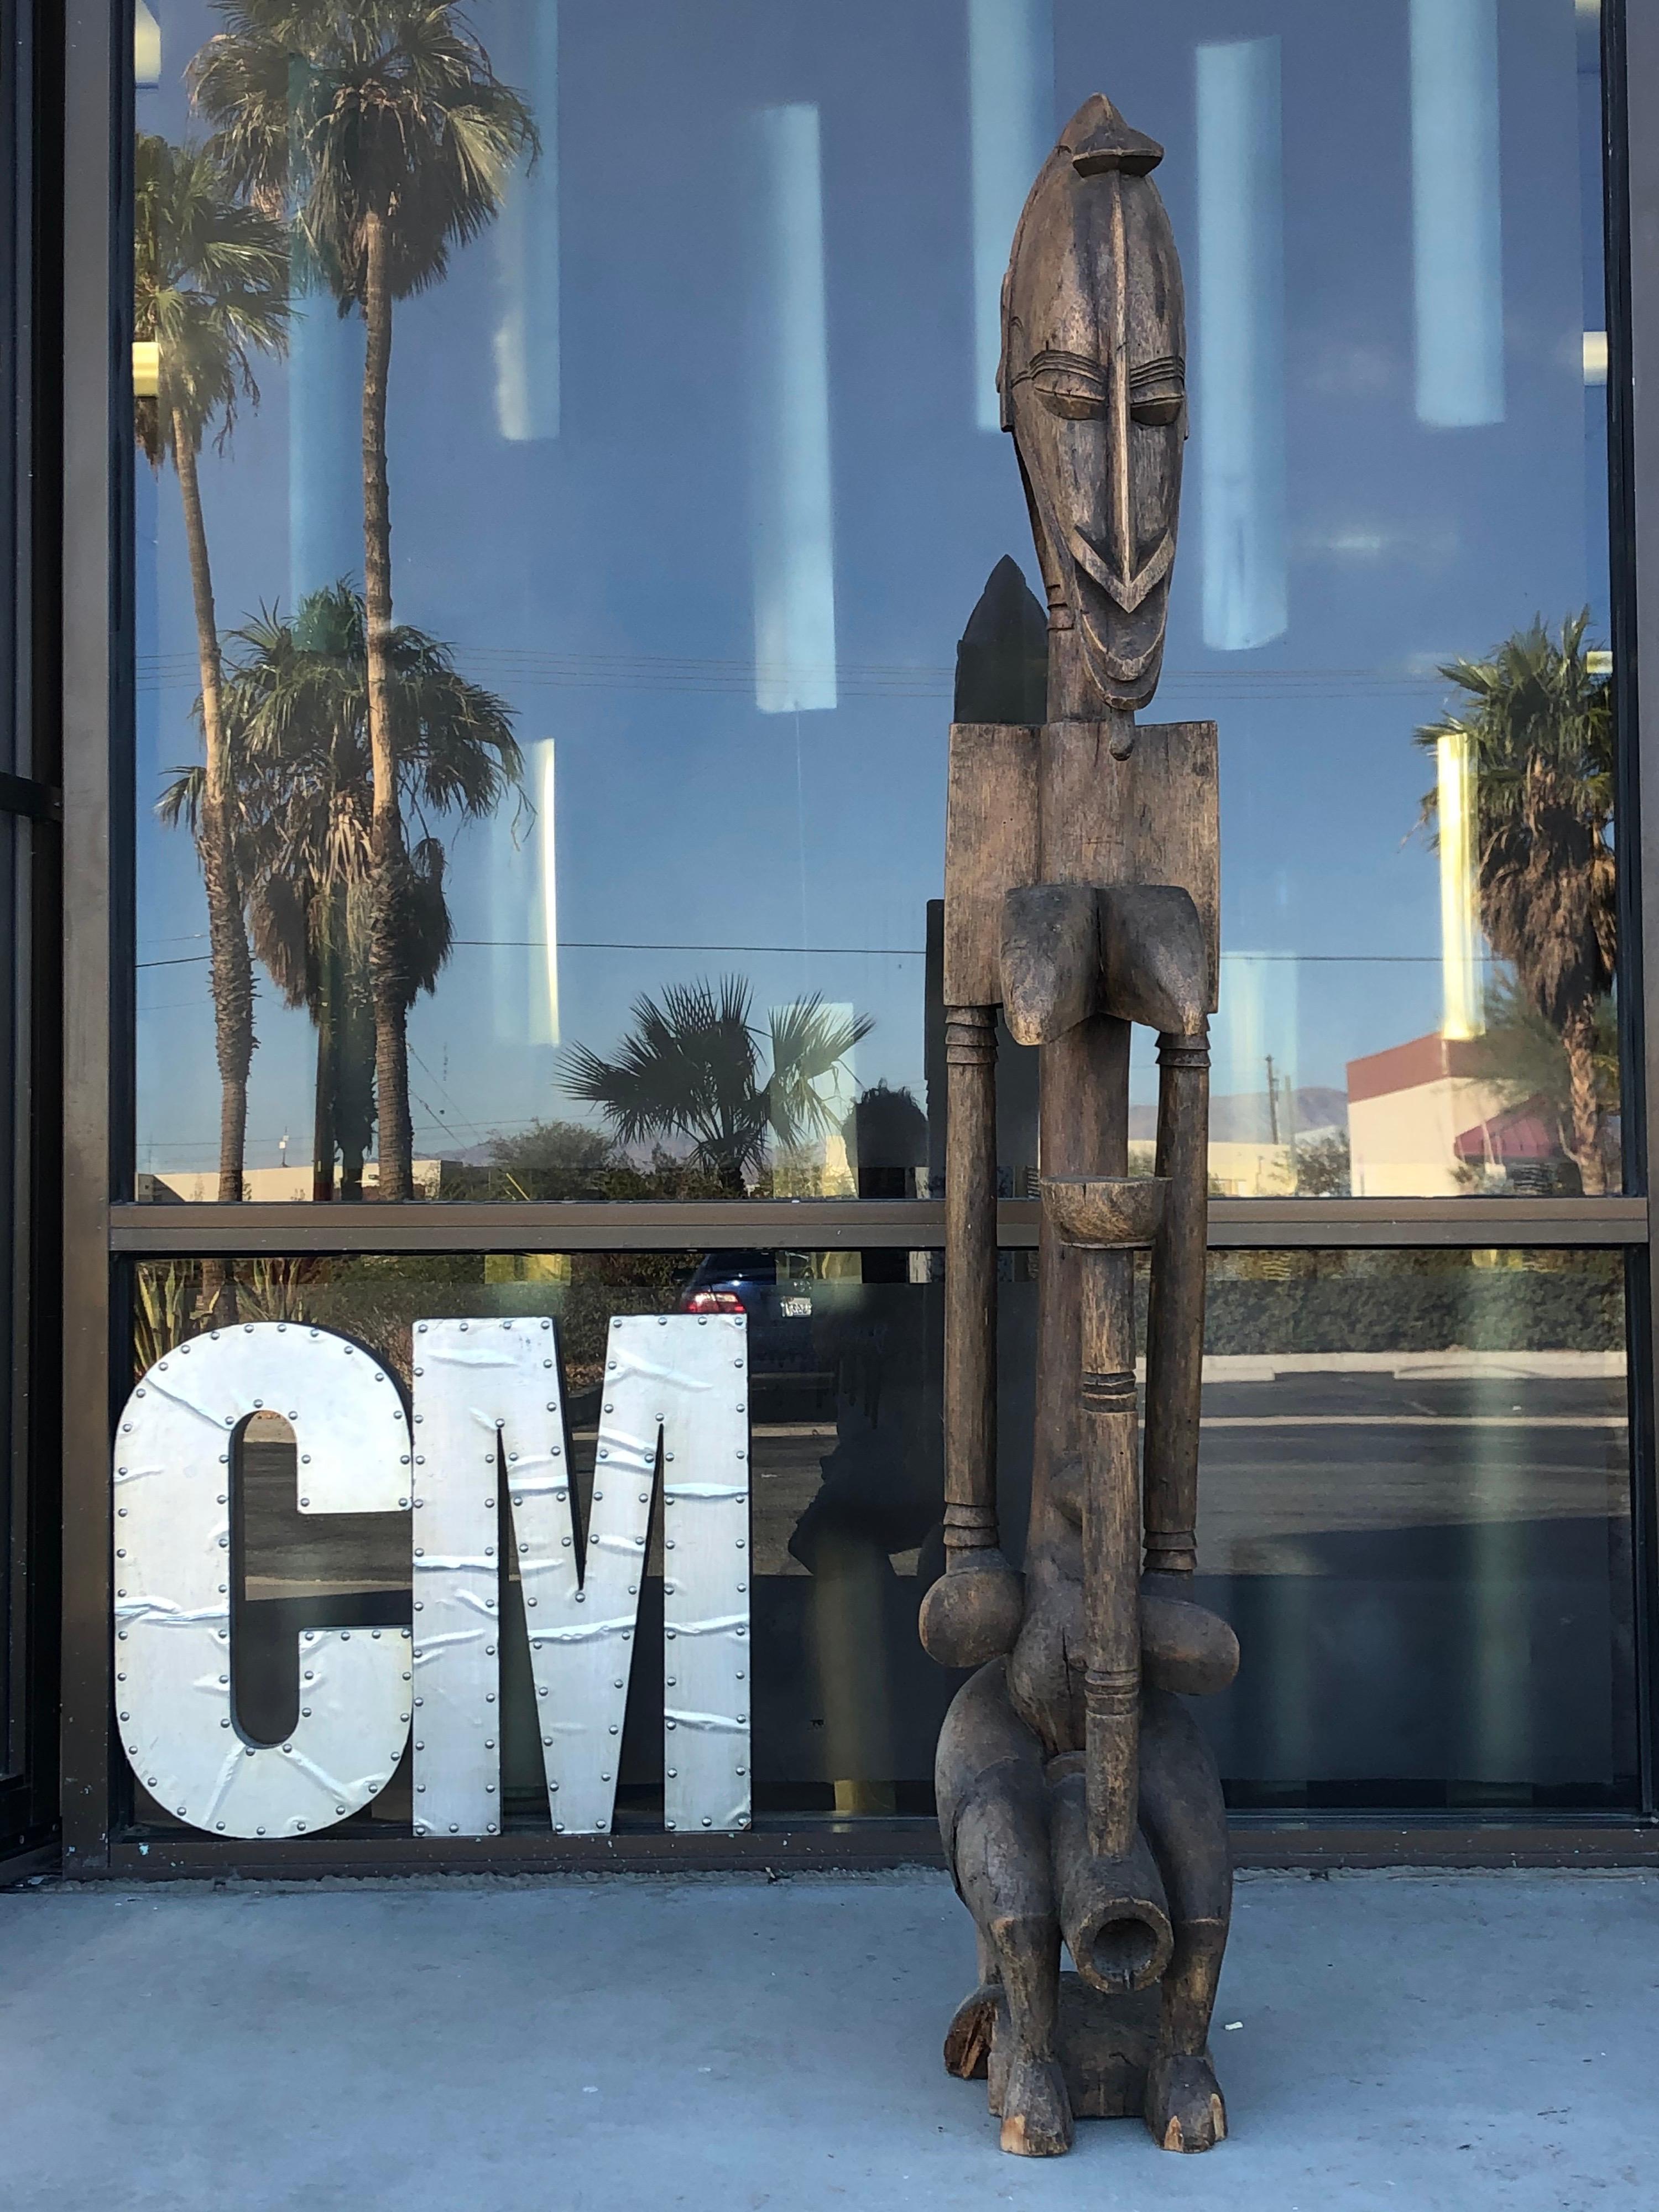 This statue was part of a collection that belong to the late actor William Holden. He purchased all this African art for his beautiful estate in Palm Springs California. This piece in particular is of a woman (mother who is protecting) It states